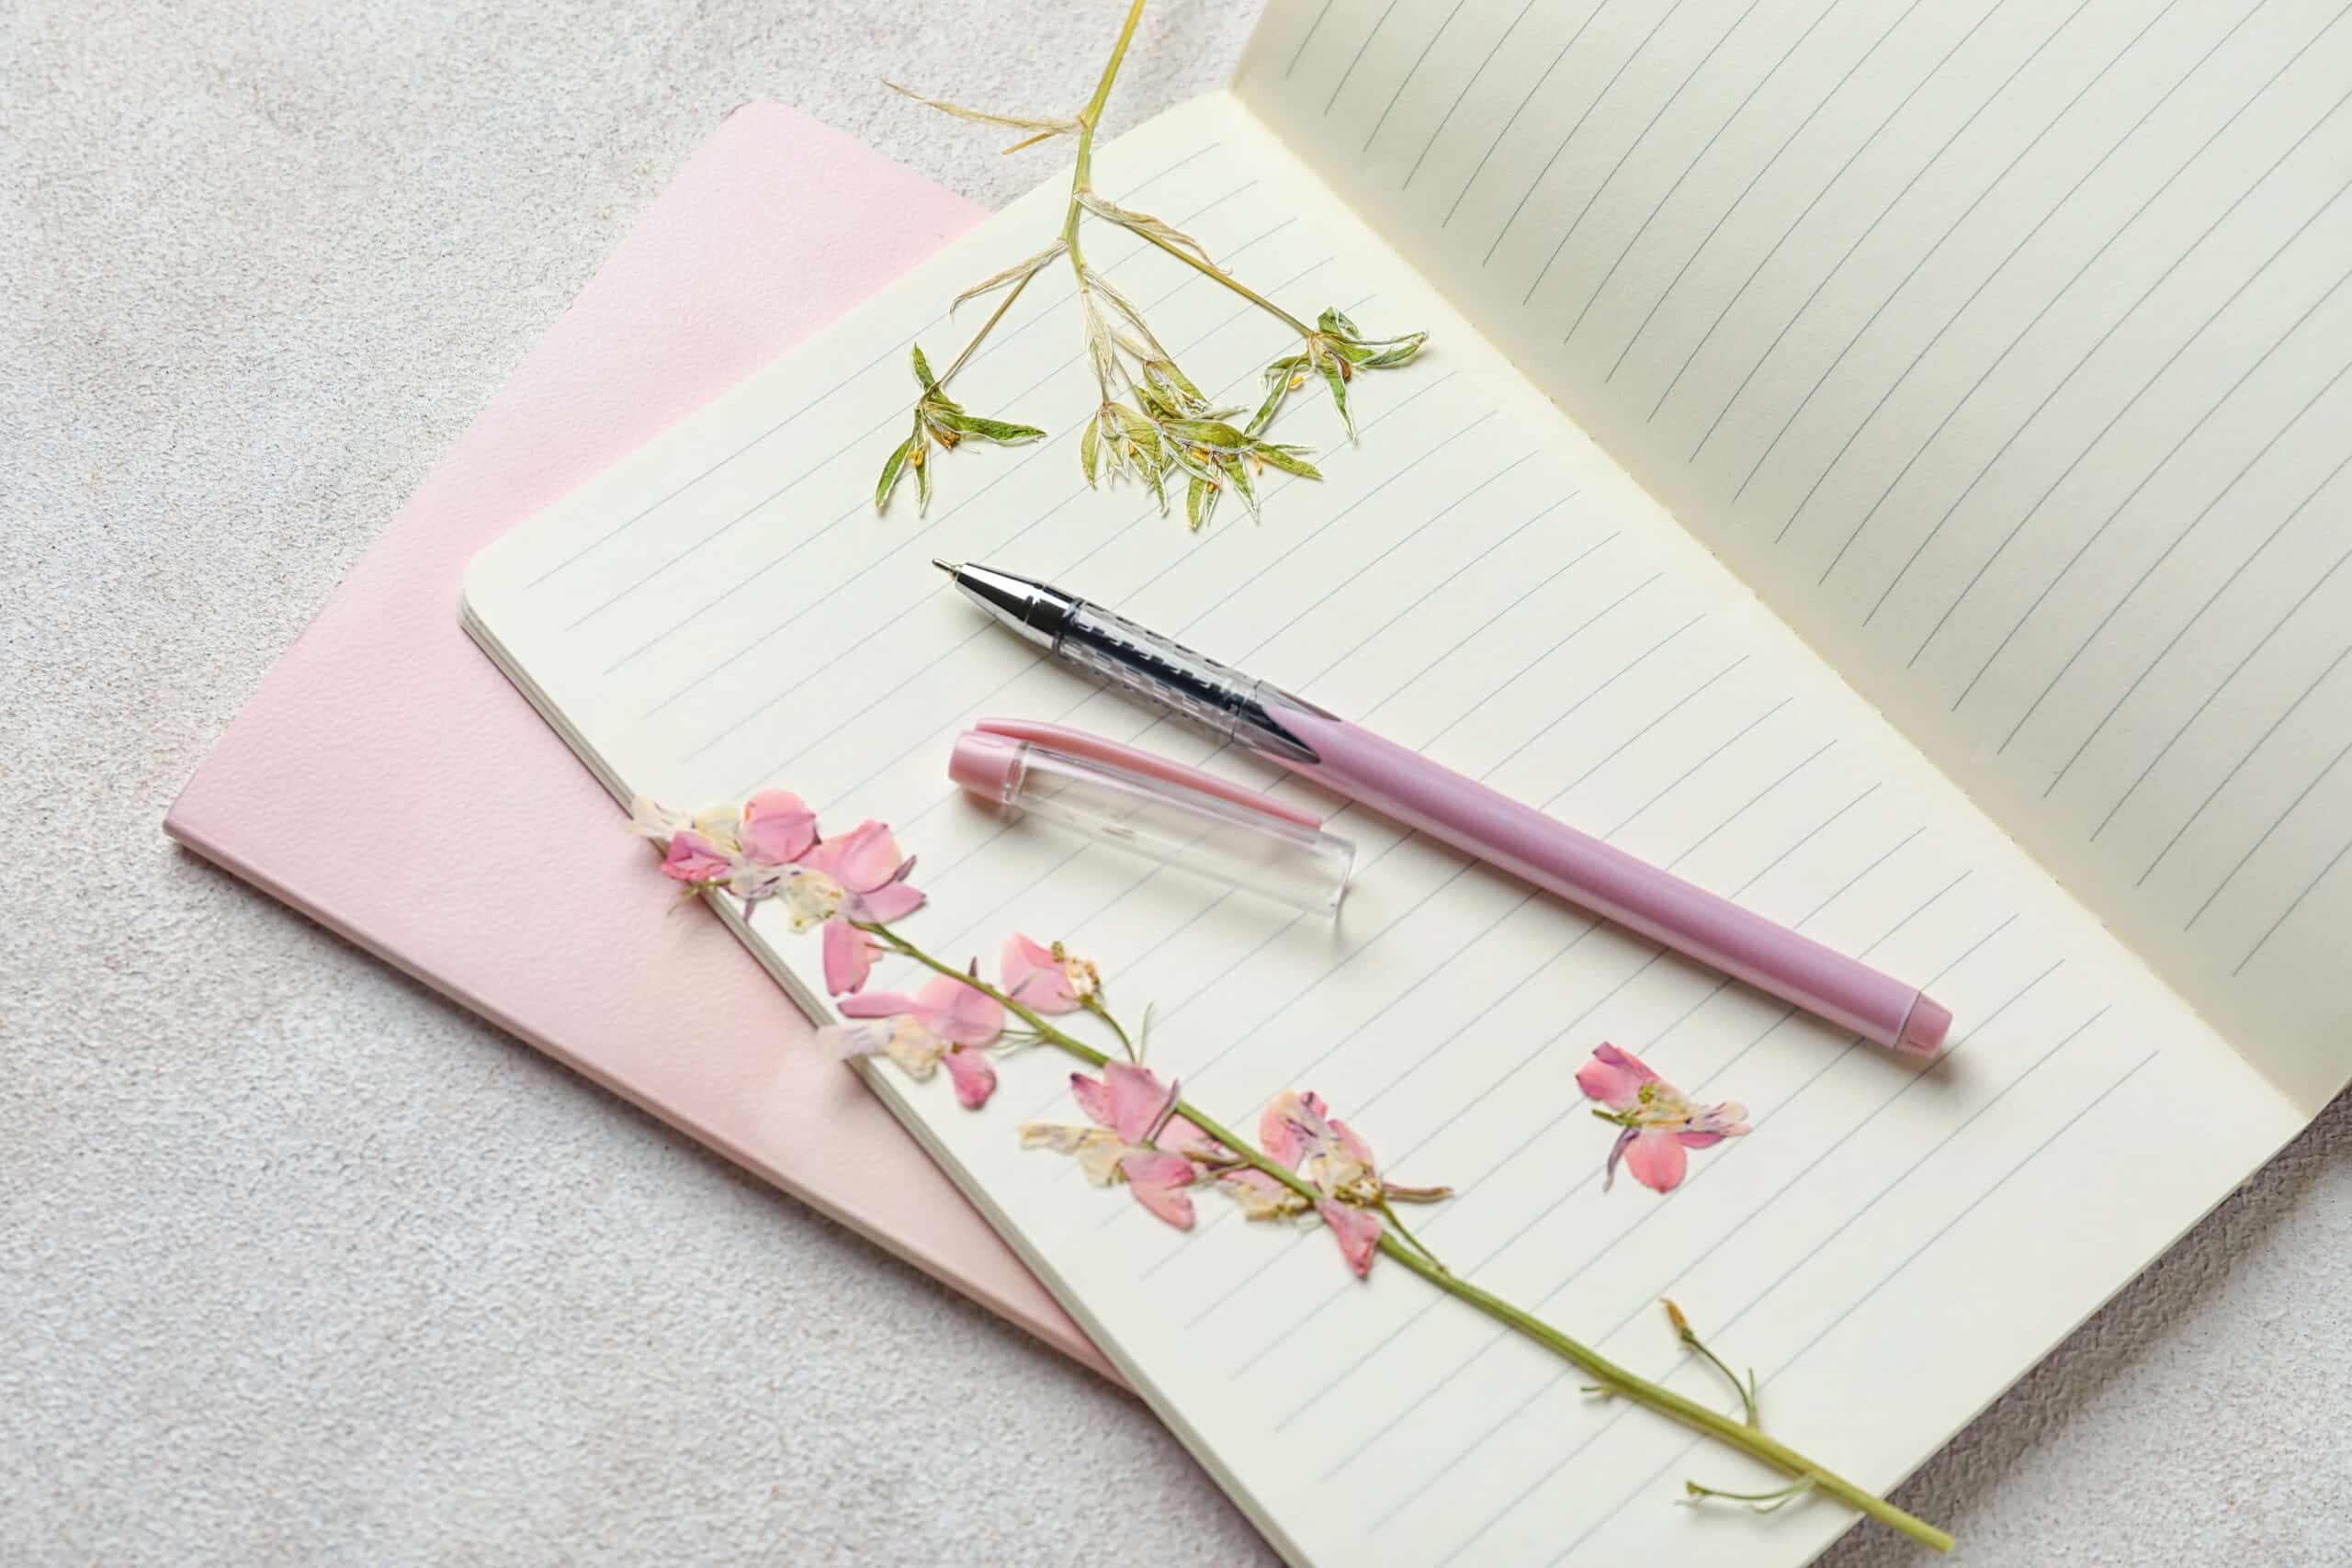 Notebooks, pen and dry pink flowers